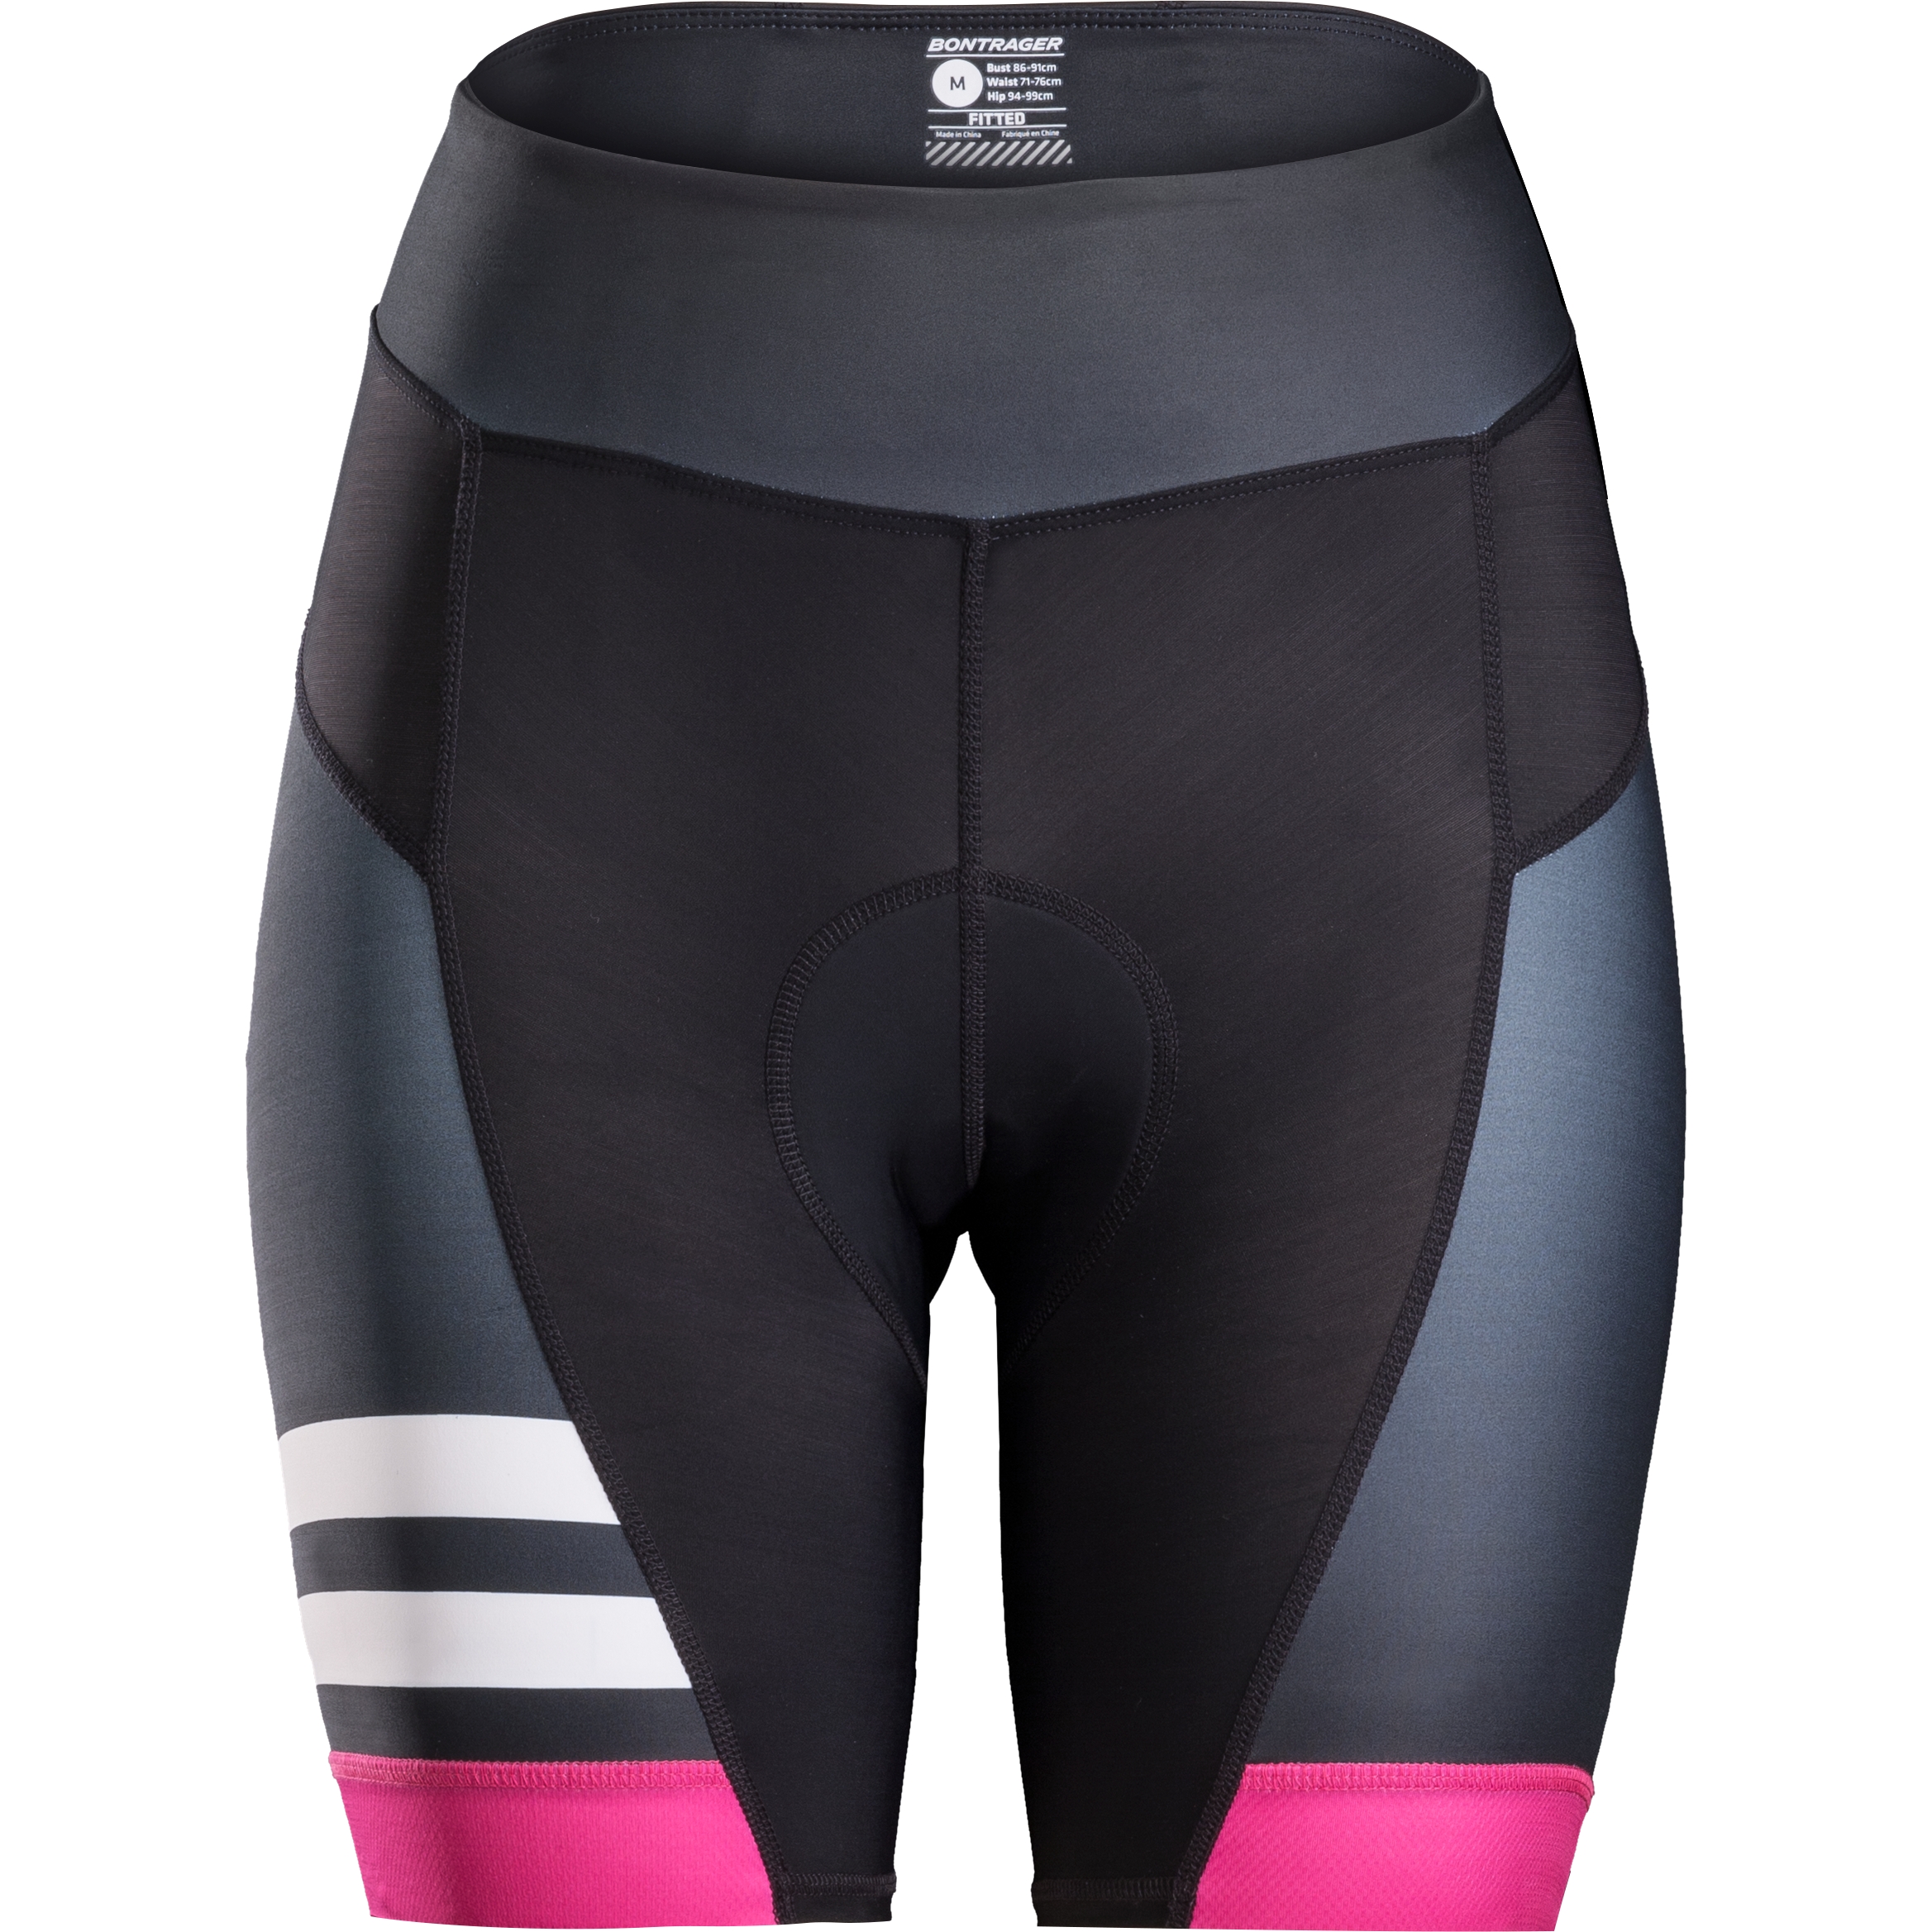 cycling clothing online